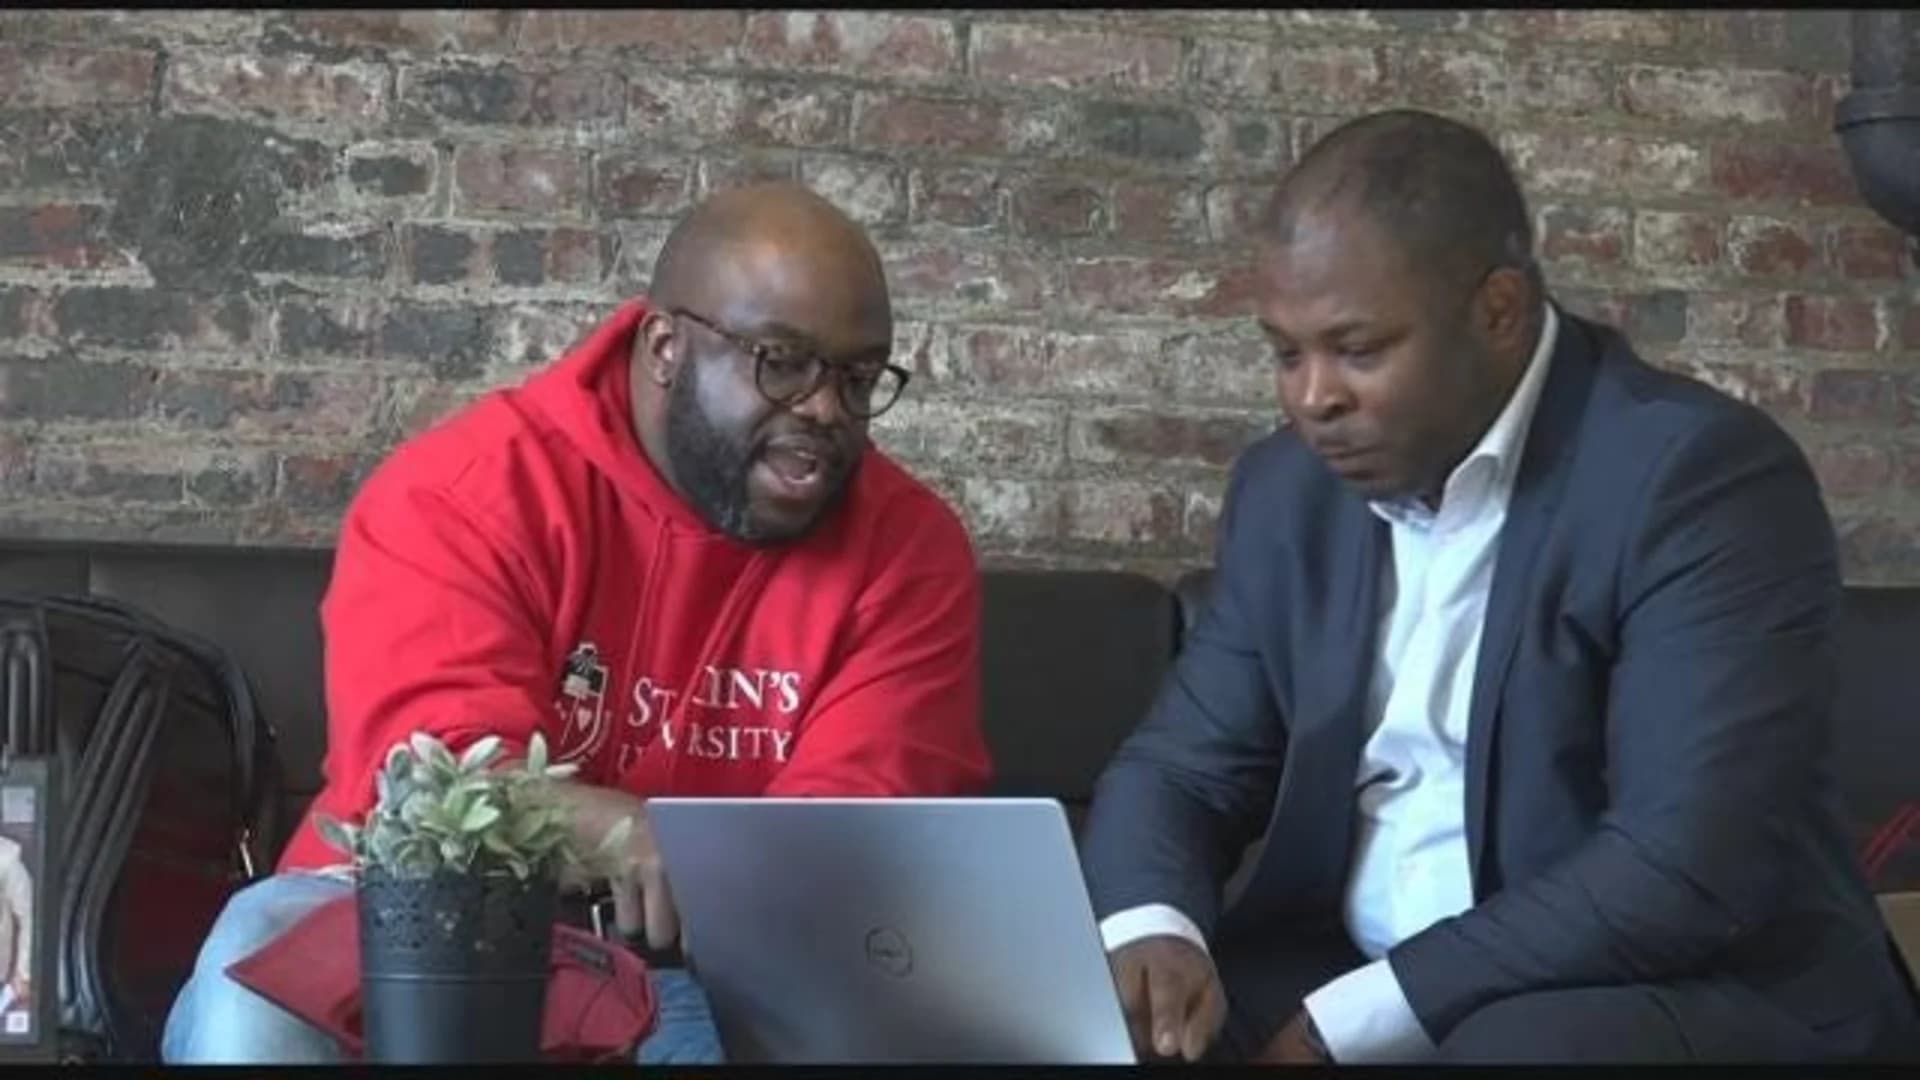 ‘We grow in community’: Gentleman’s Factory offers men of color a place to collaborate